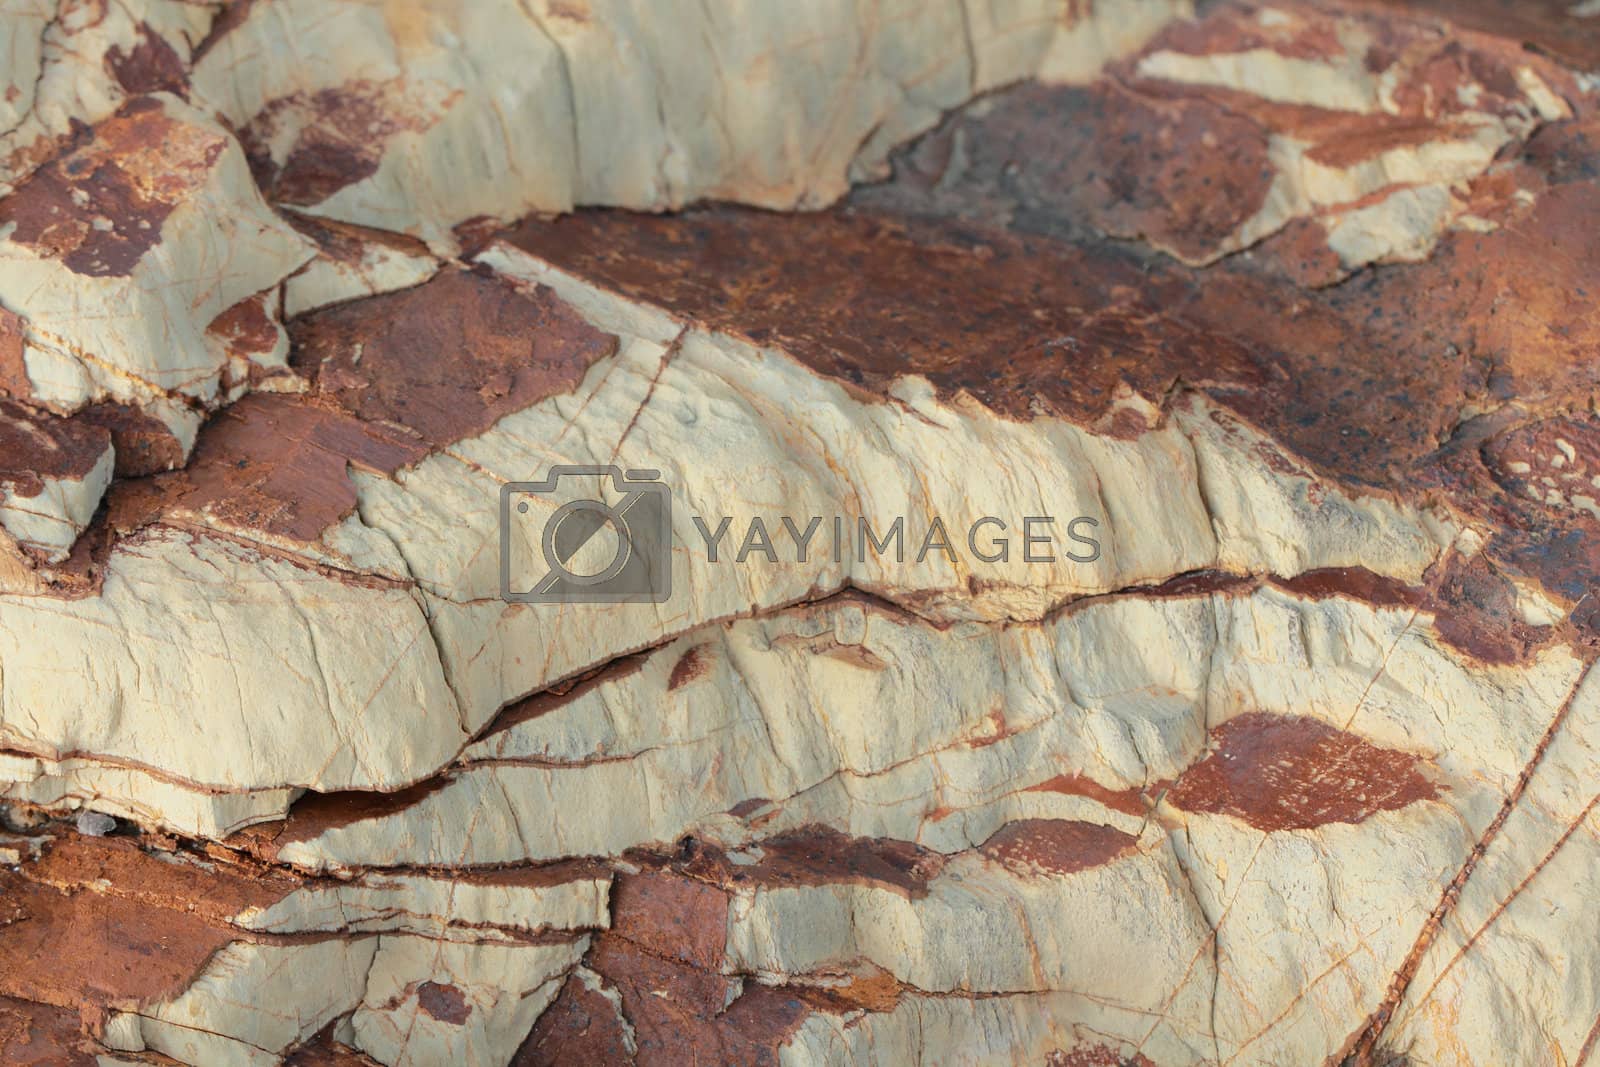 Royalty free image of Background of Rock by olovedog